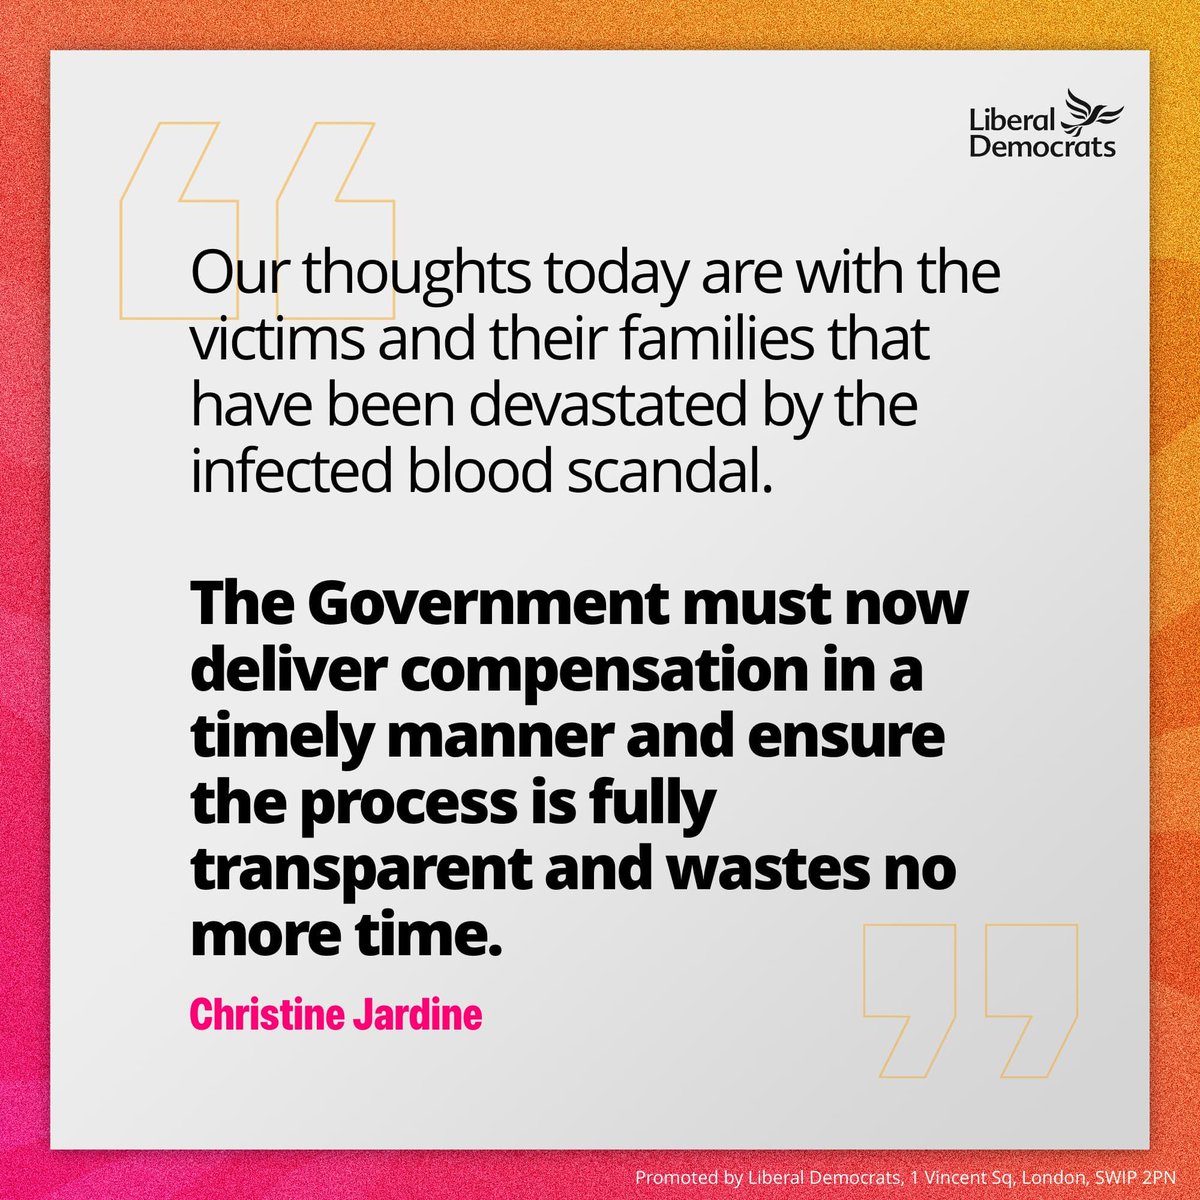 Our thoughts today are with the victims and their families that have been devastated by this scandal. The Government must now deliver compensation in a timely manner and ensure the process is fully transparent and wastes no more time.